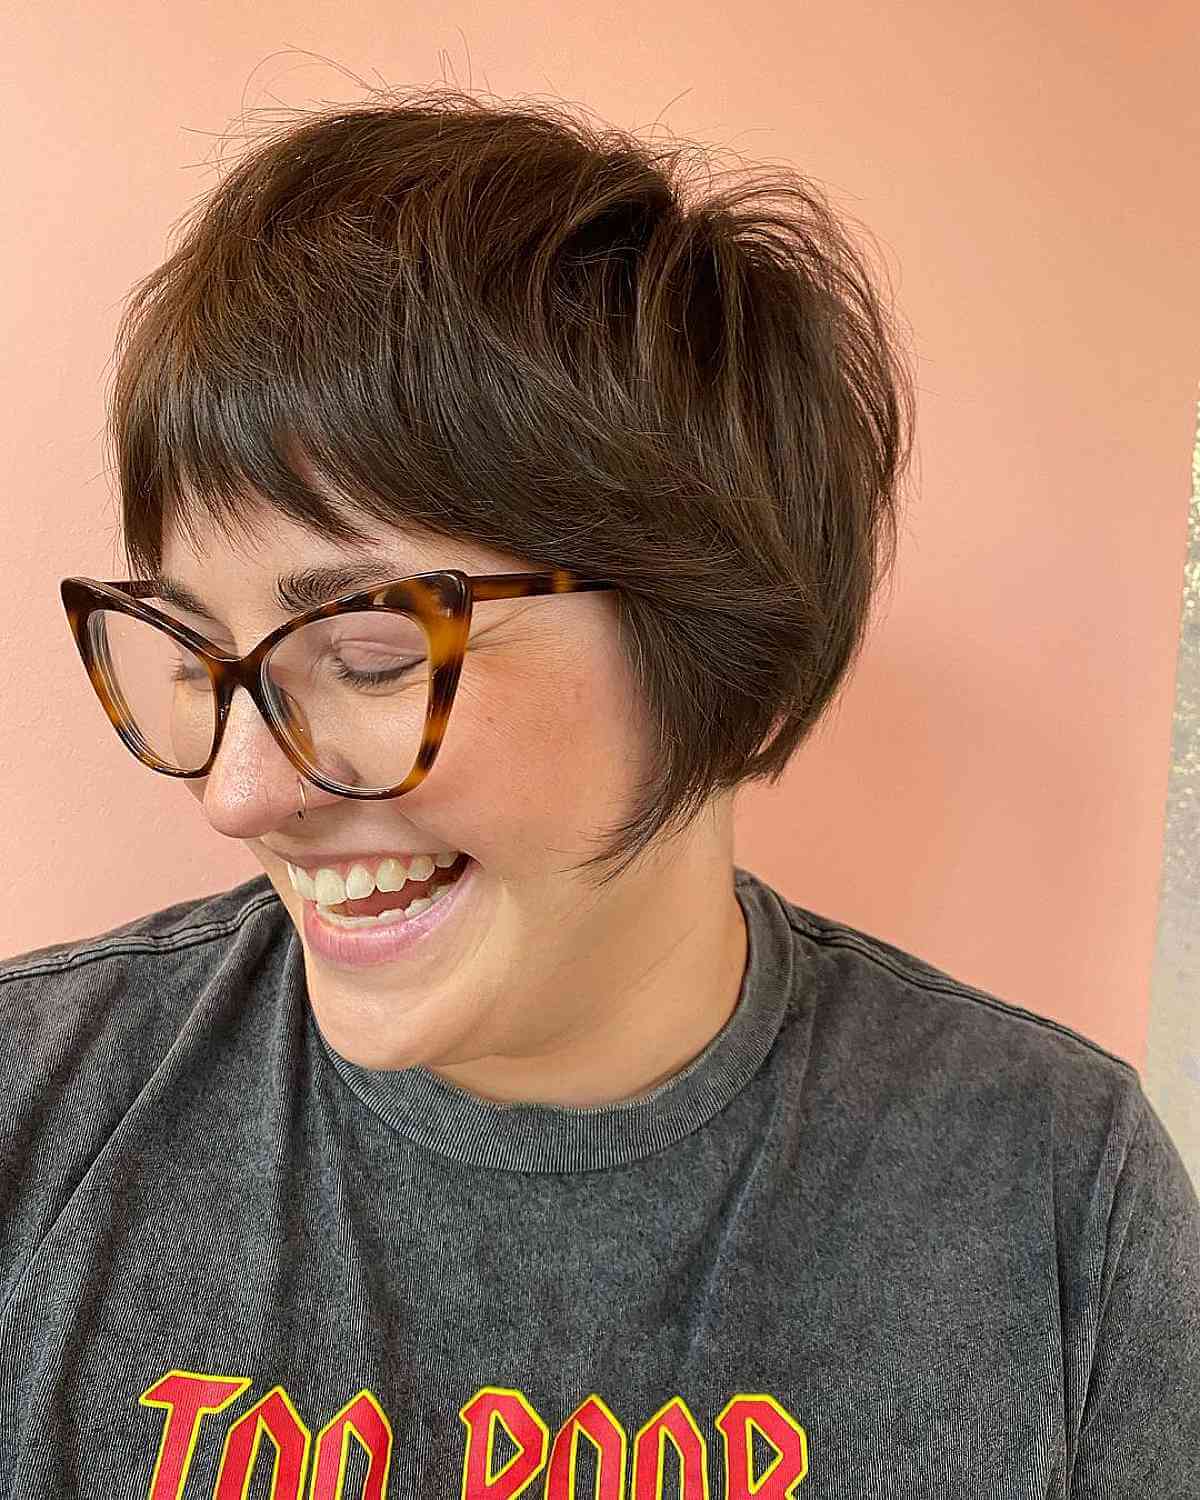 26 Types of Ear-Length Bob Haircuts Women as Asking for Right Now